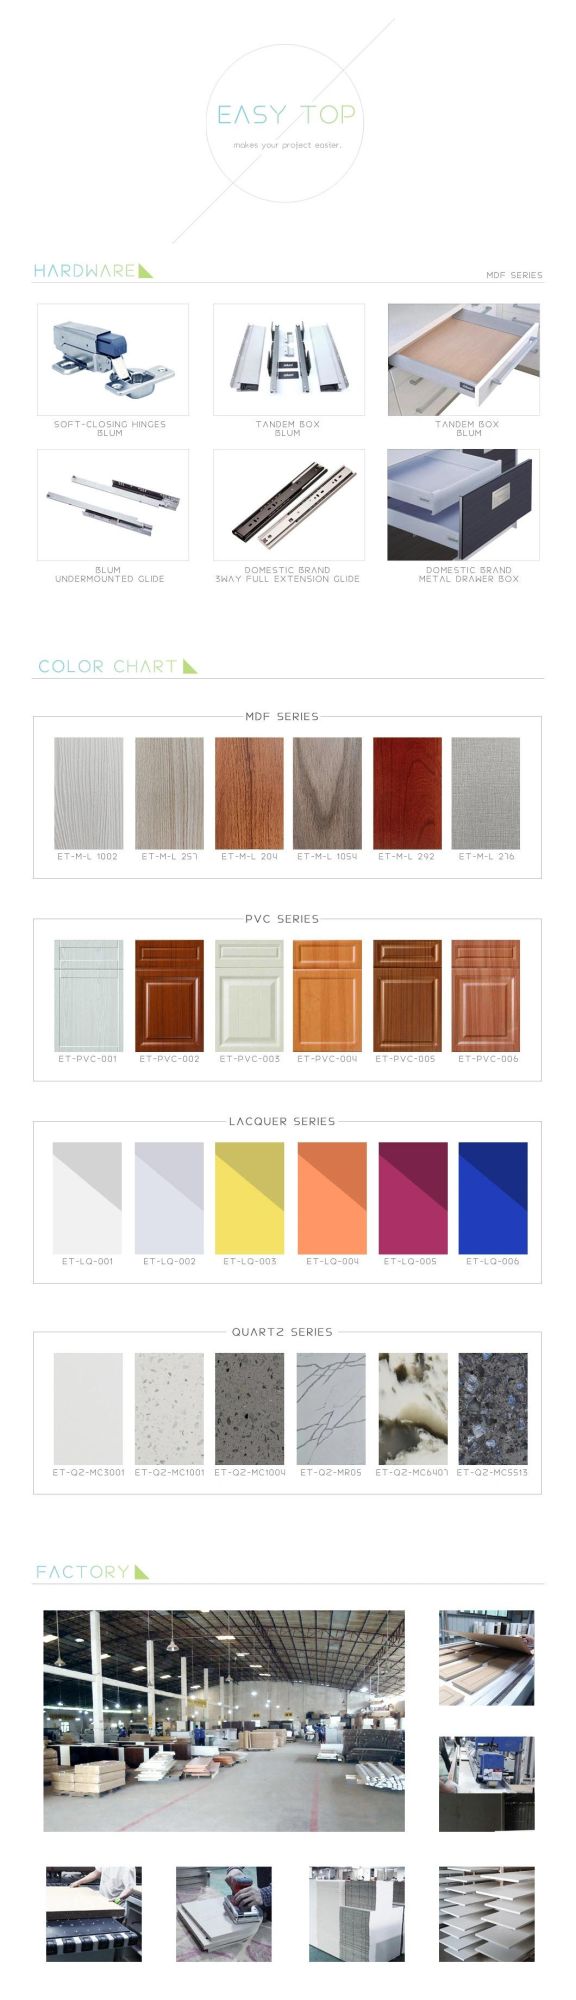 European Style Oven Pantry Custom Design Wood Grain Finish Solid Wood Kitchen Cabinets